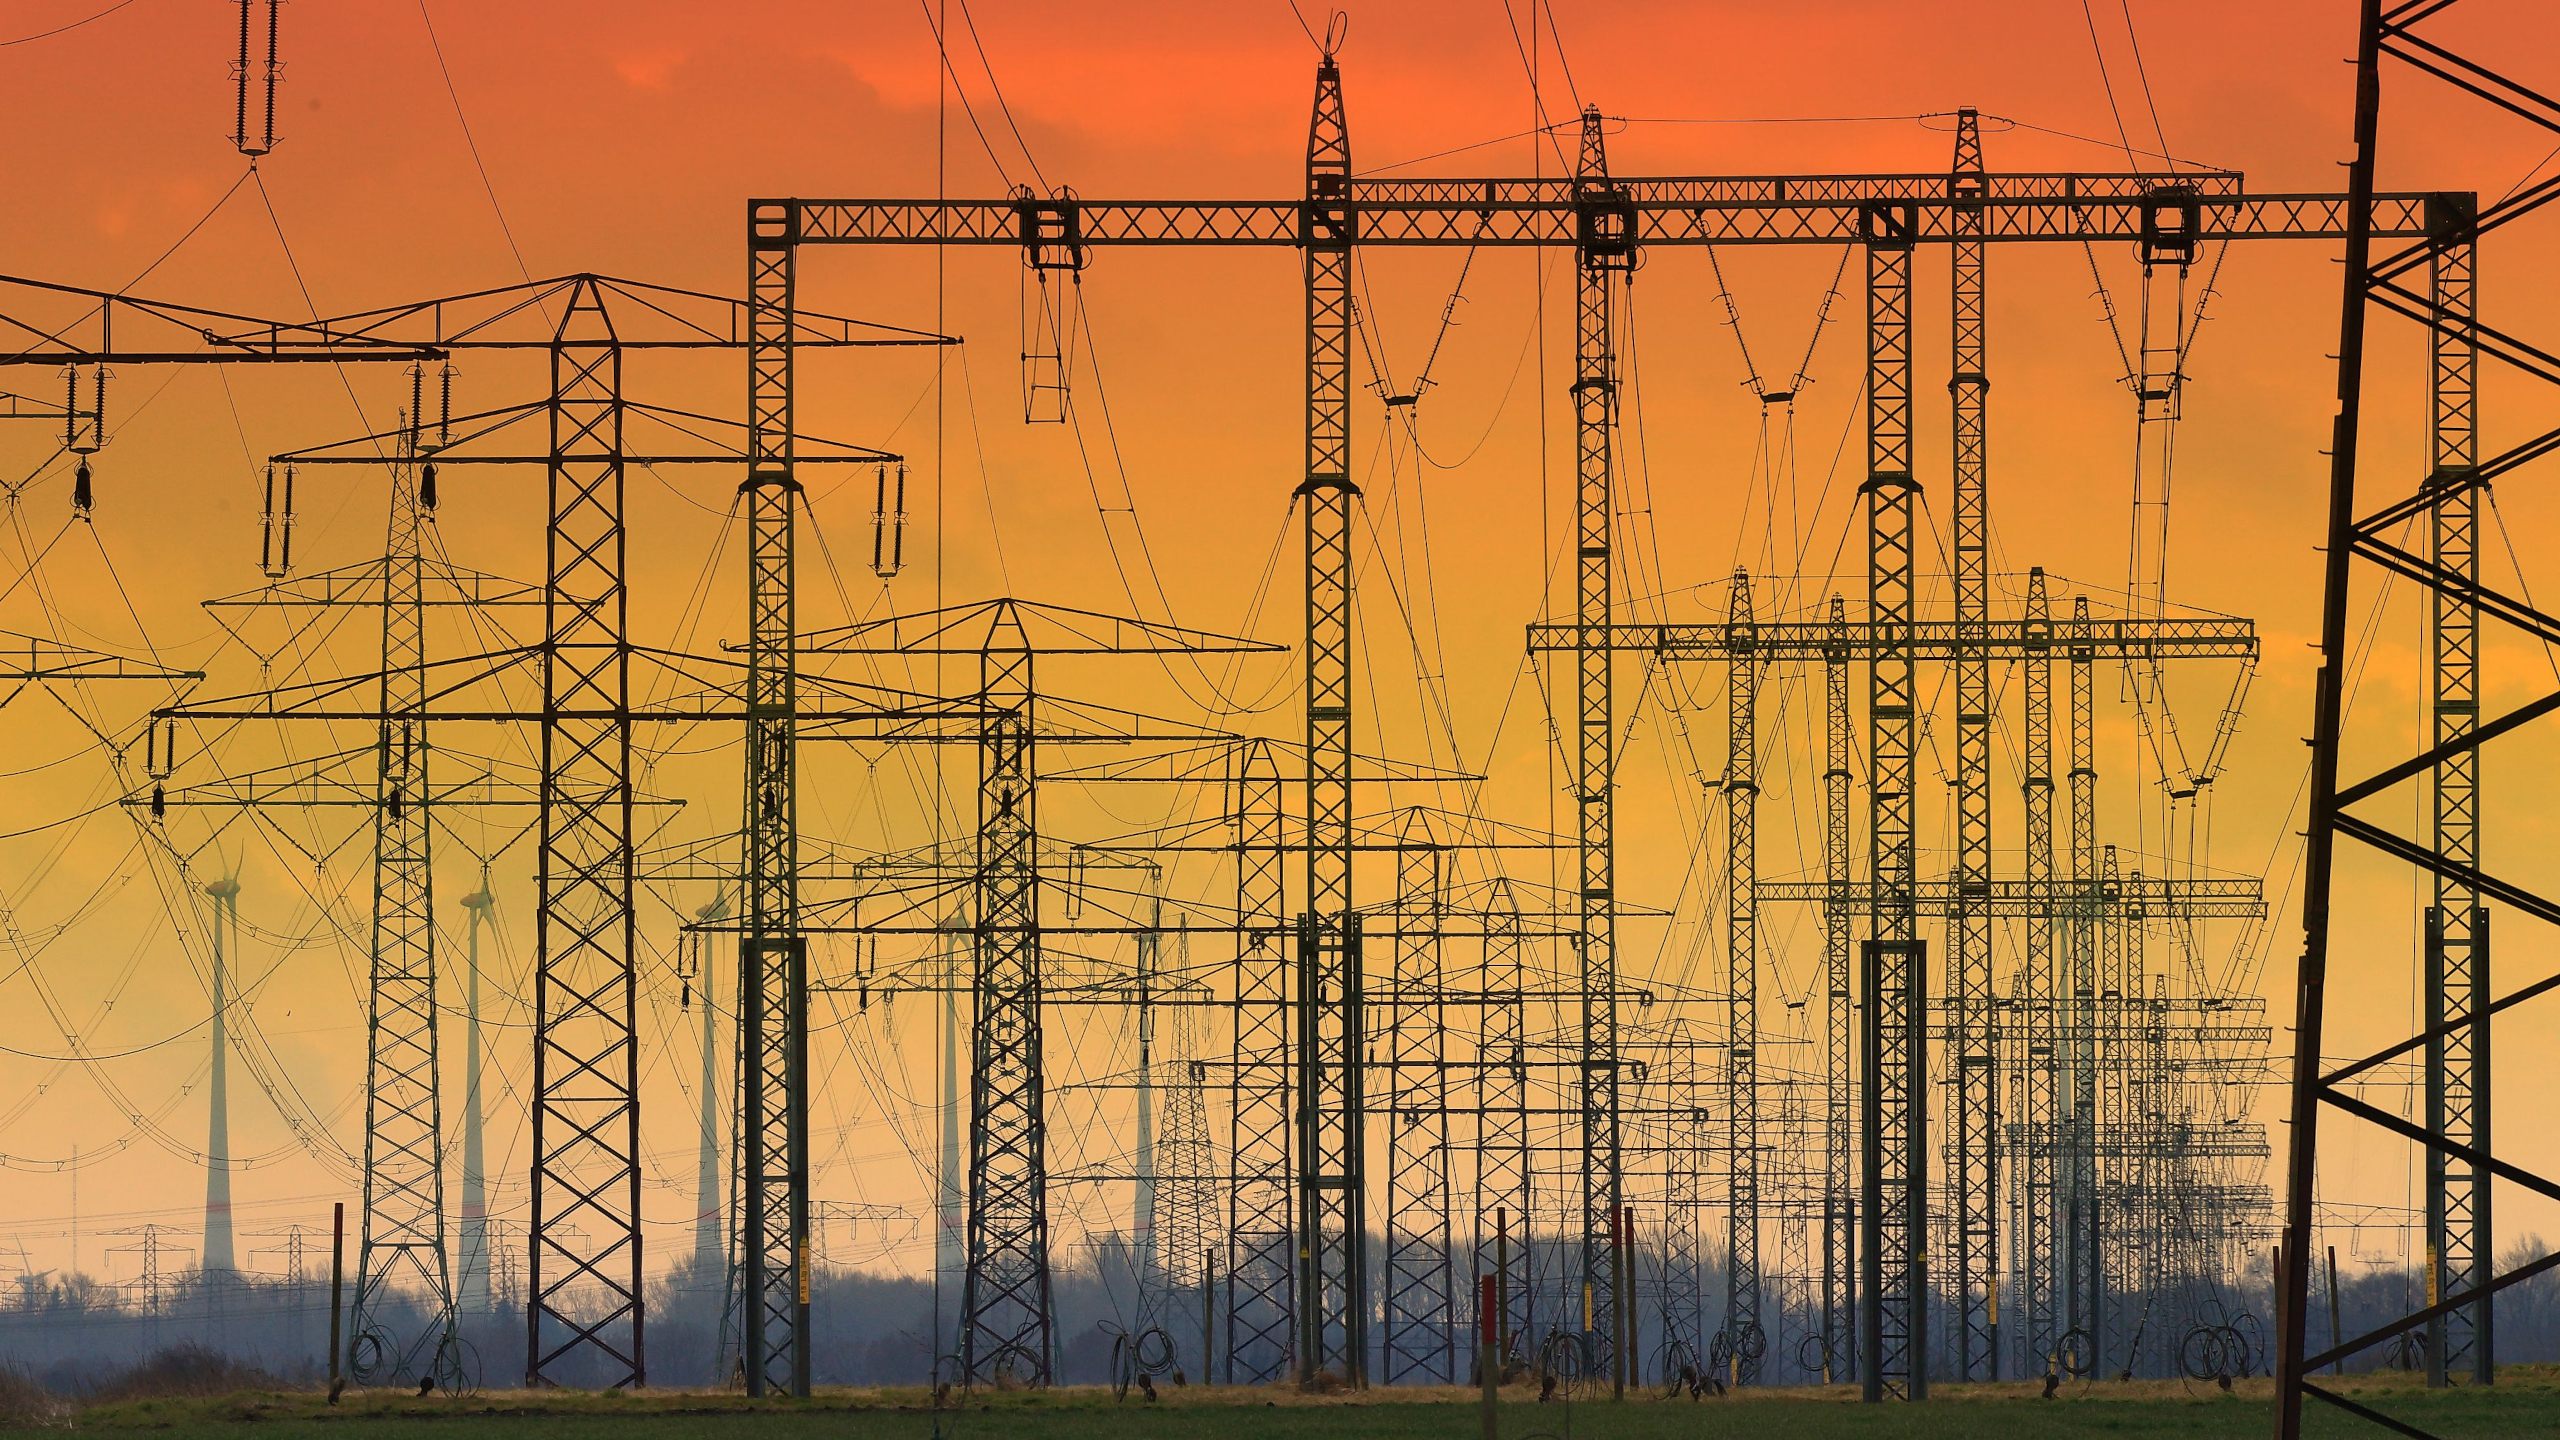 General 2560x1440 power lines structure sunset electricity technology pylon